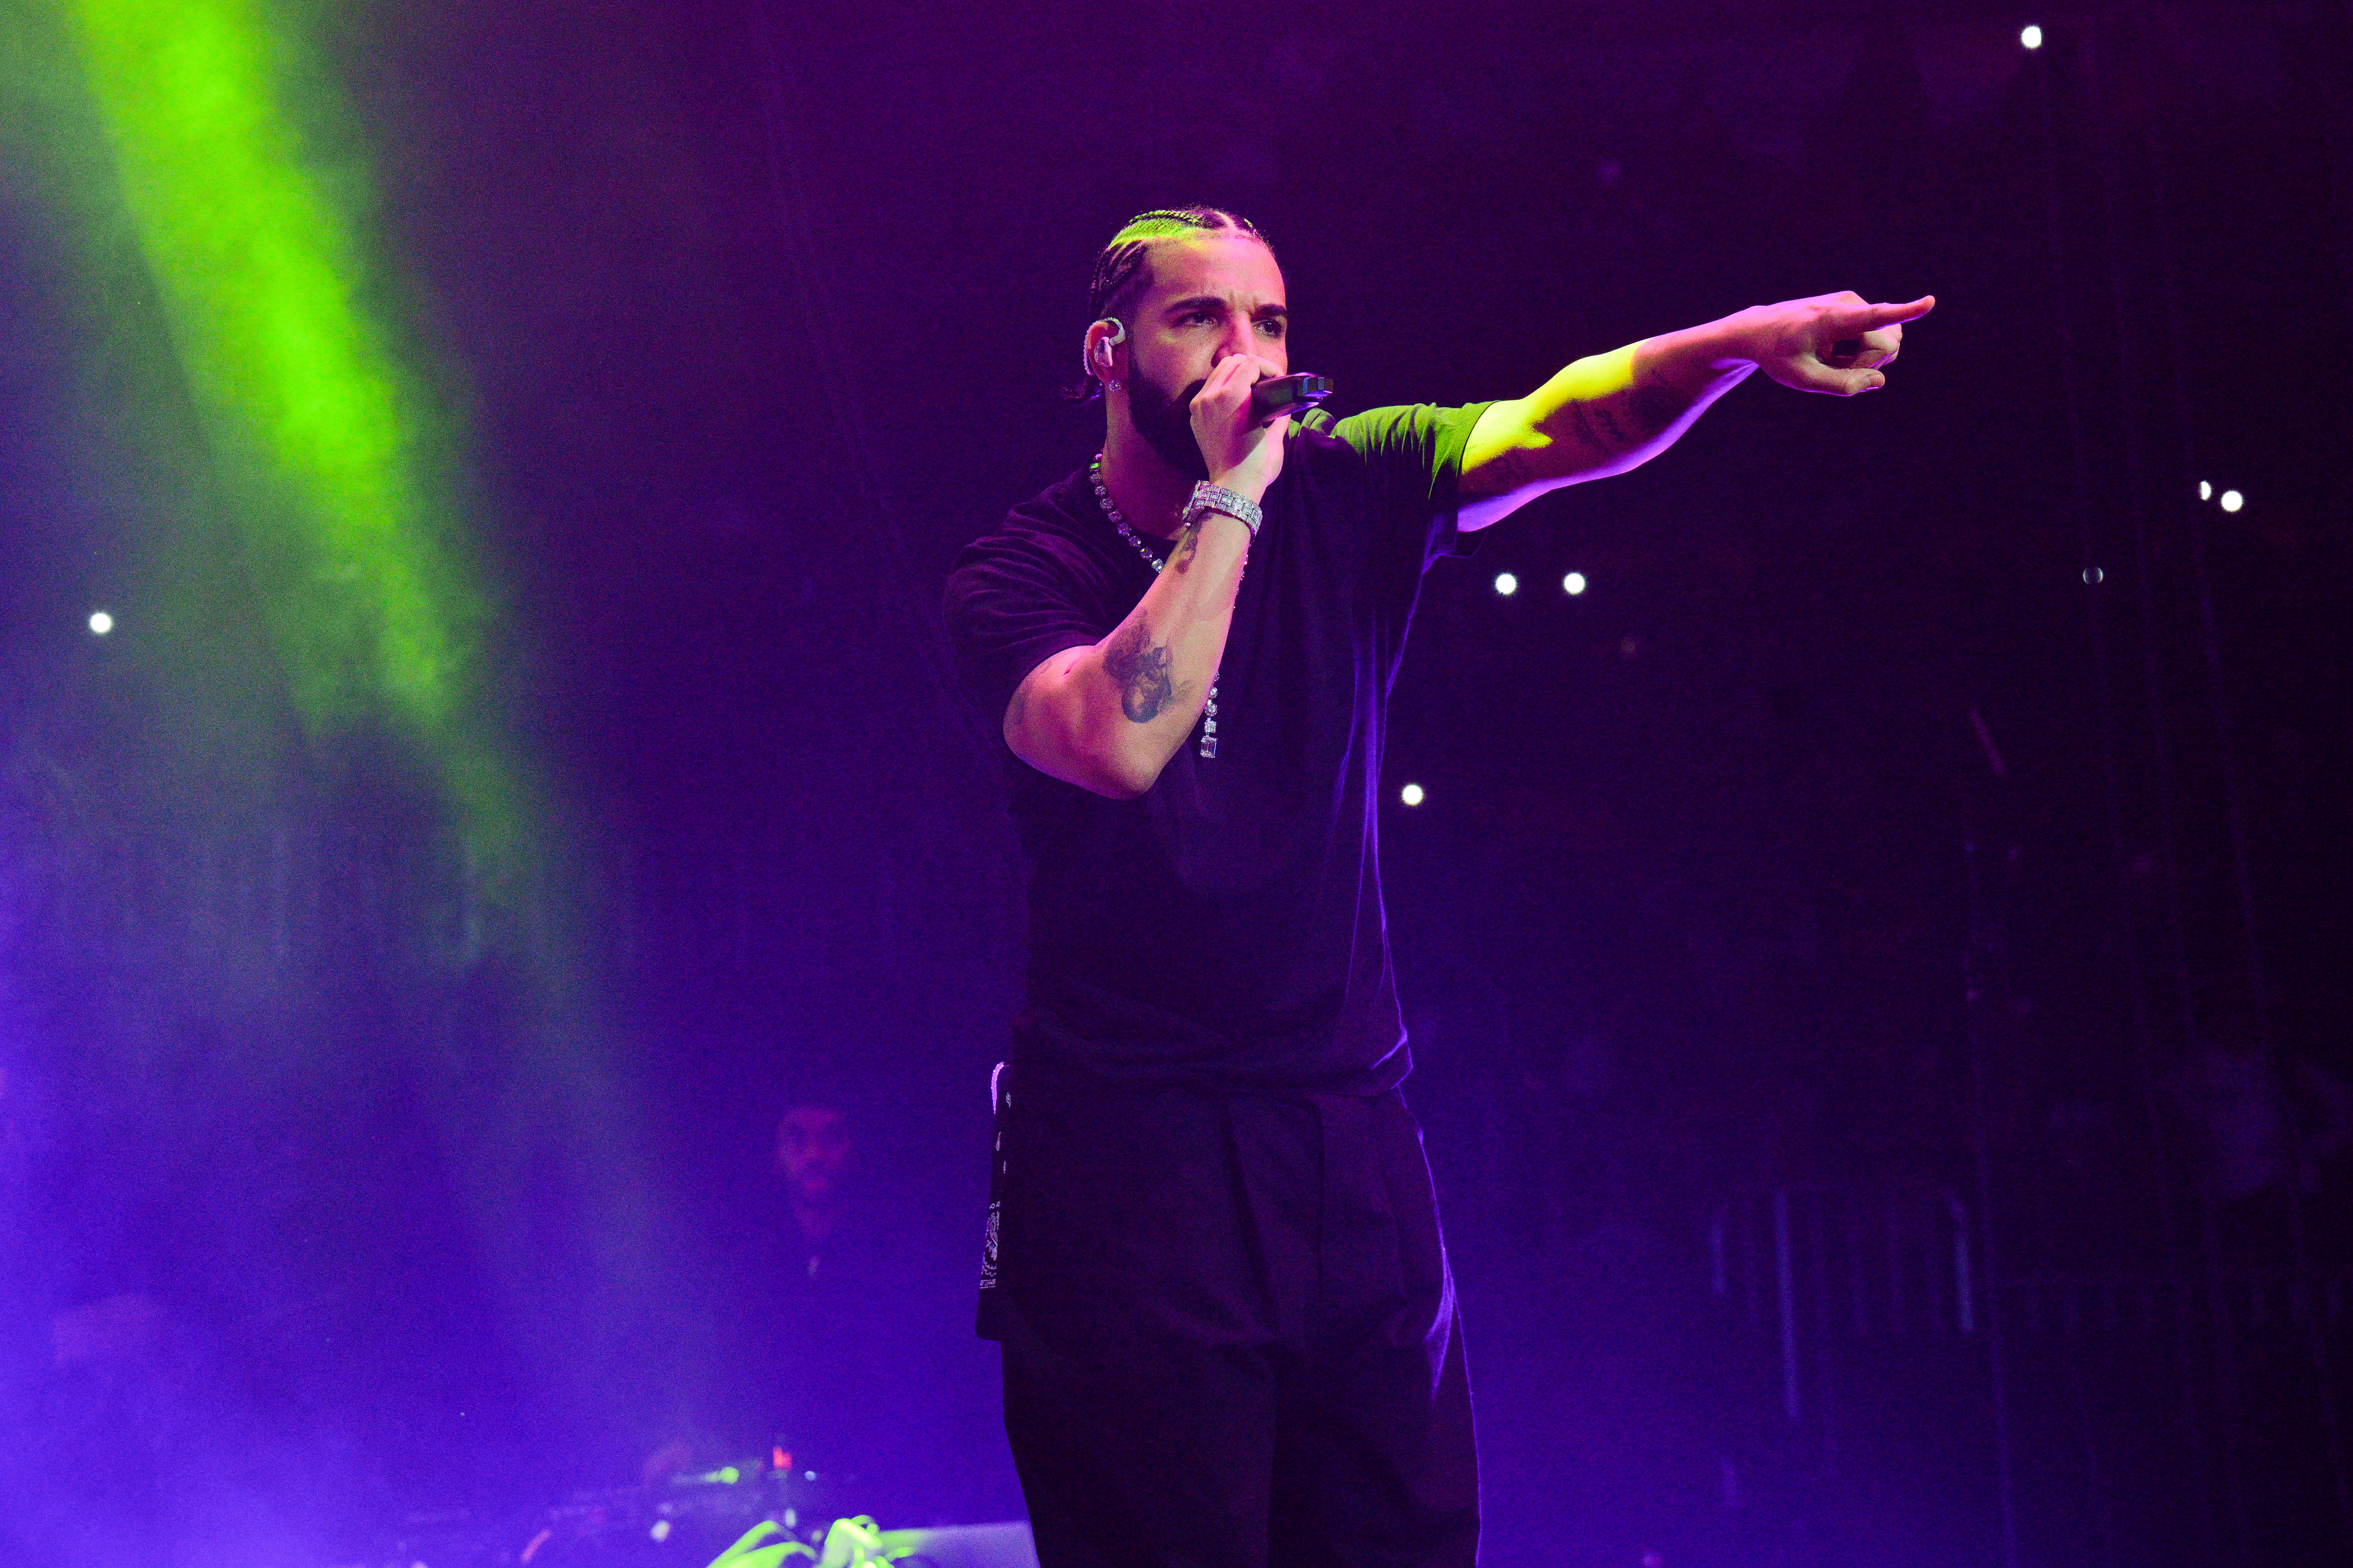 Drake on stage singing and pointing into the audience